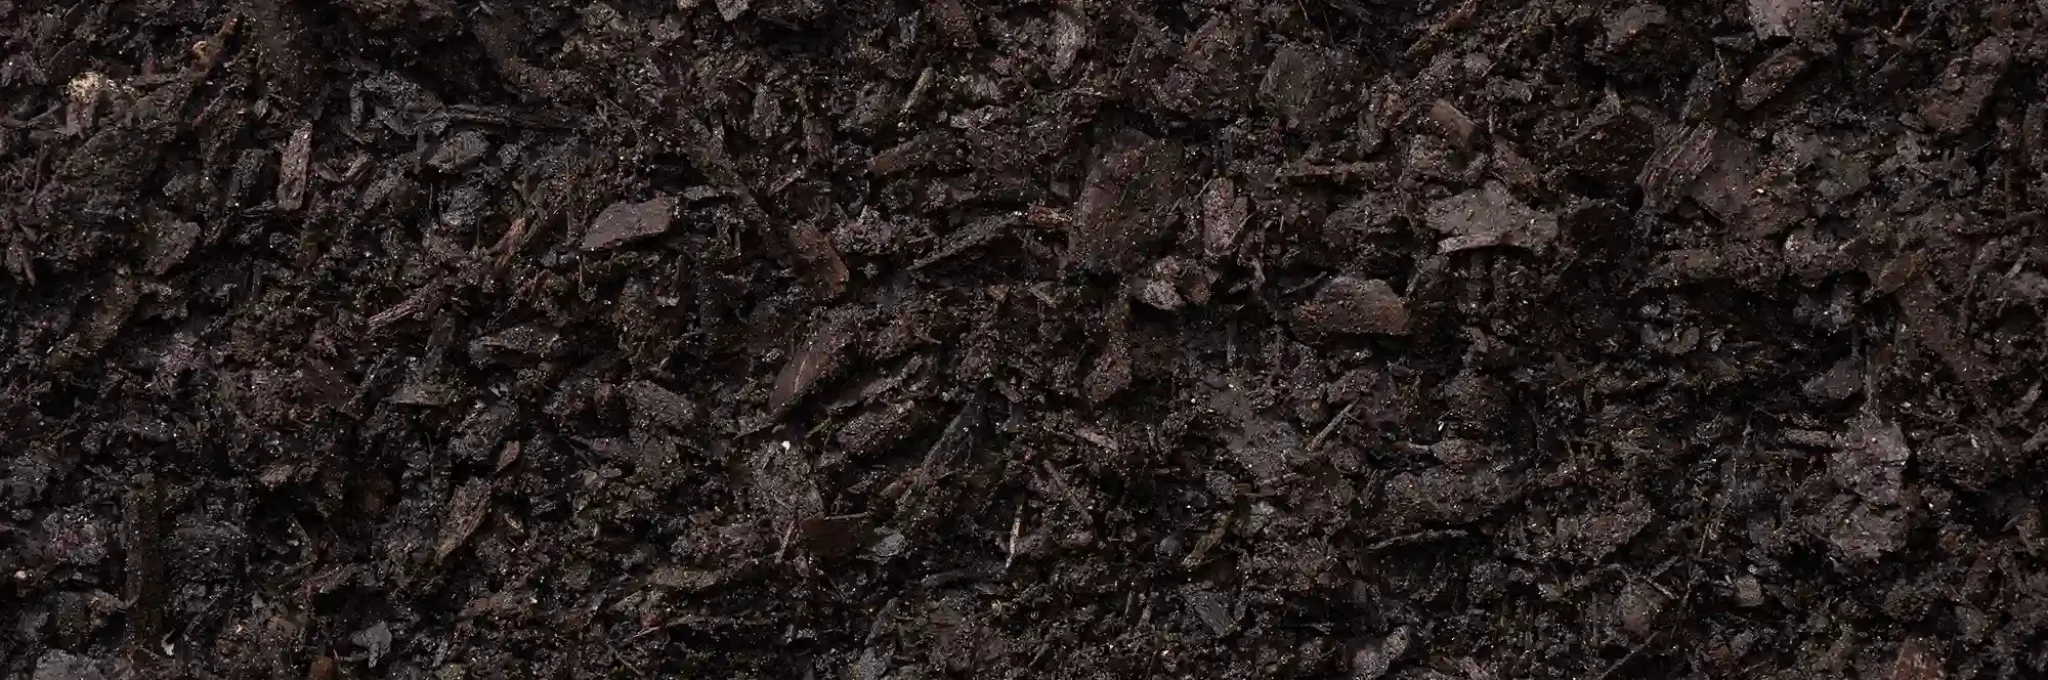 A close-up view of COMAND Scape Professional-Grade Planting Soil.